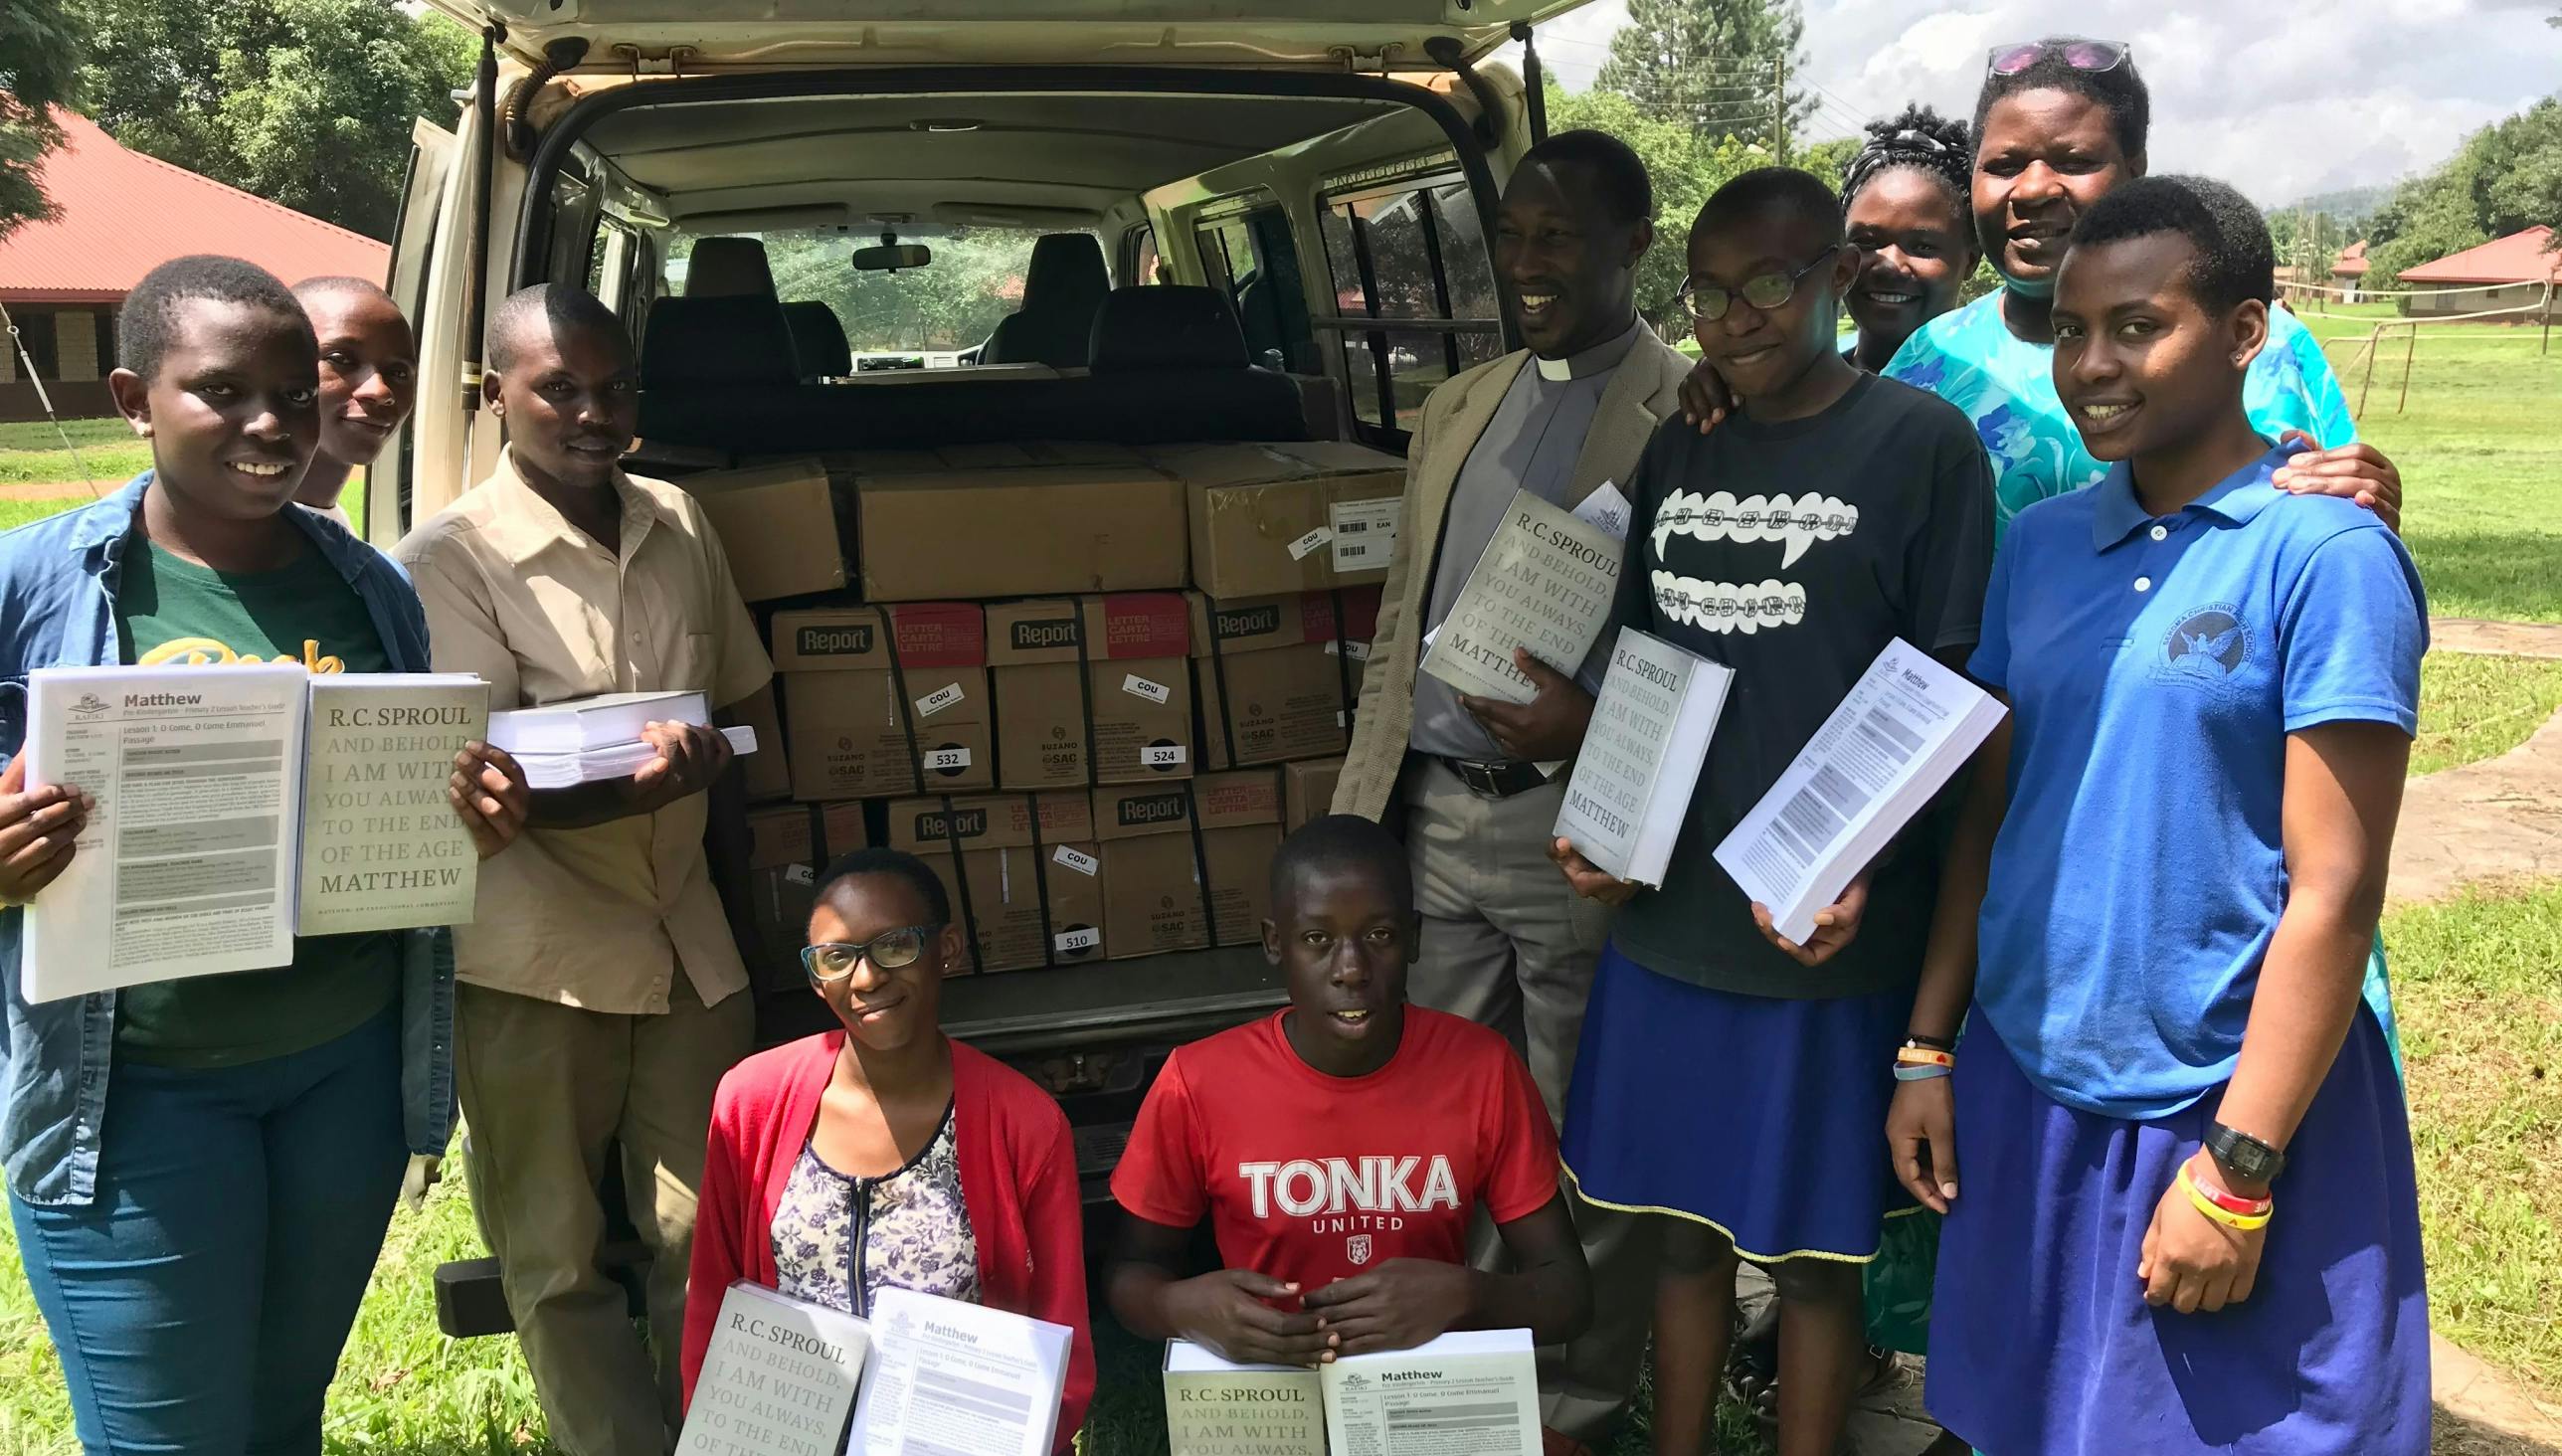 Individuals in Africa receive a shipment of R.C. Sproul's commentary on Matthew